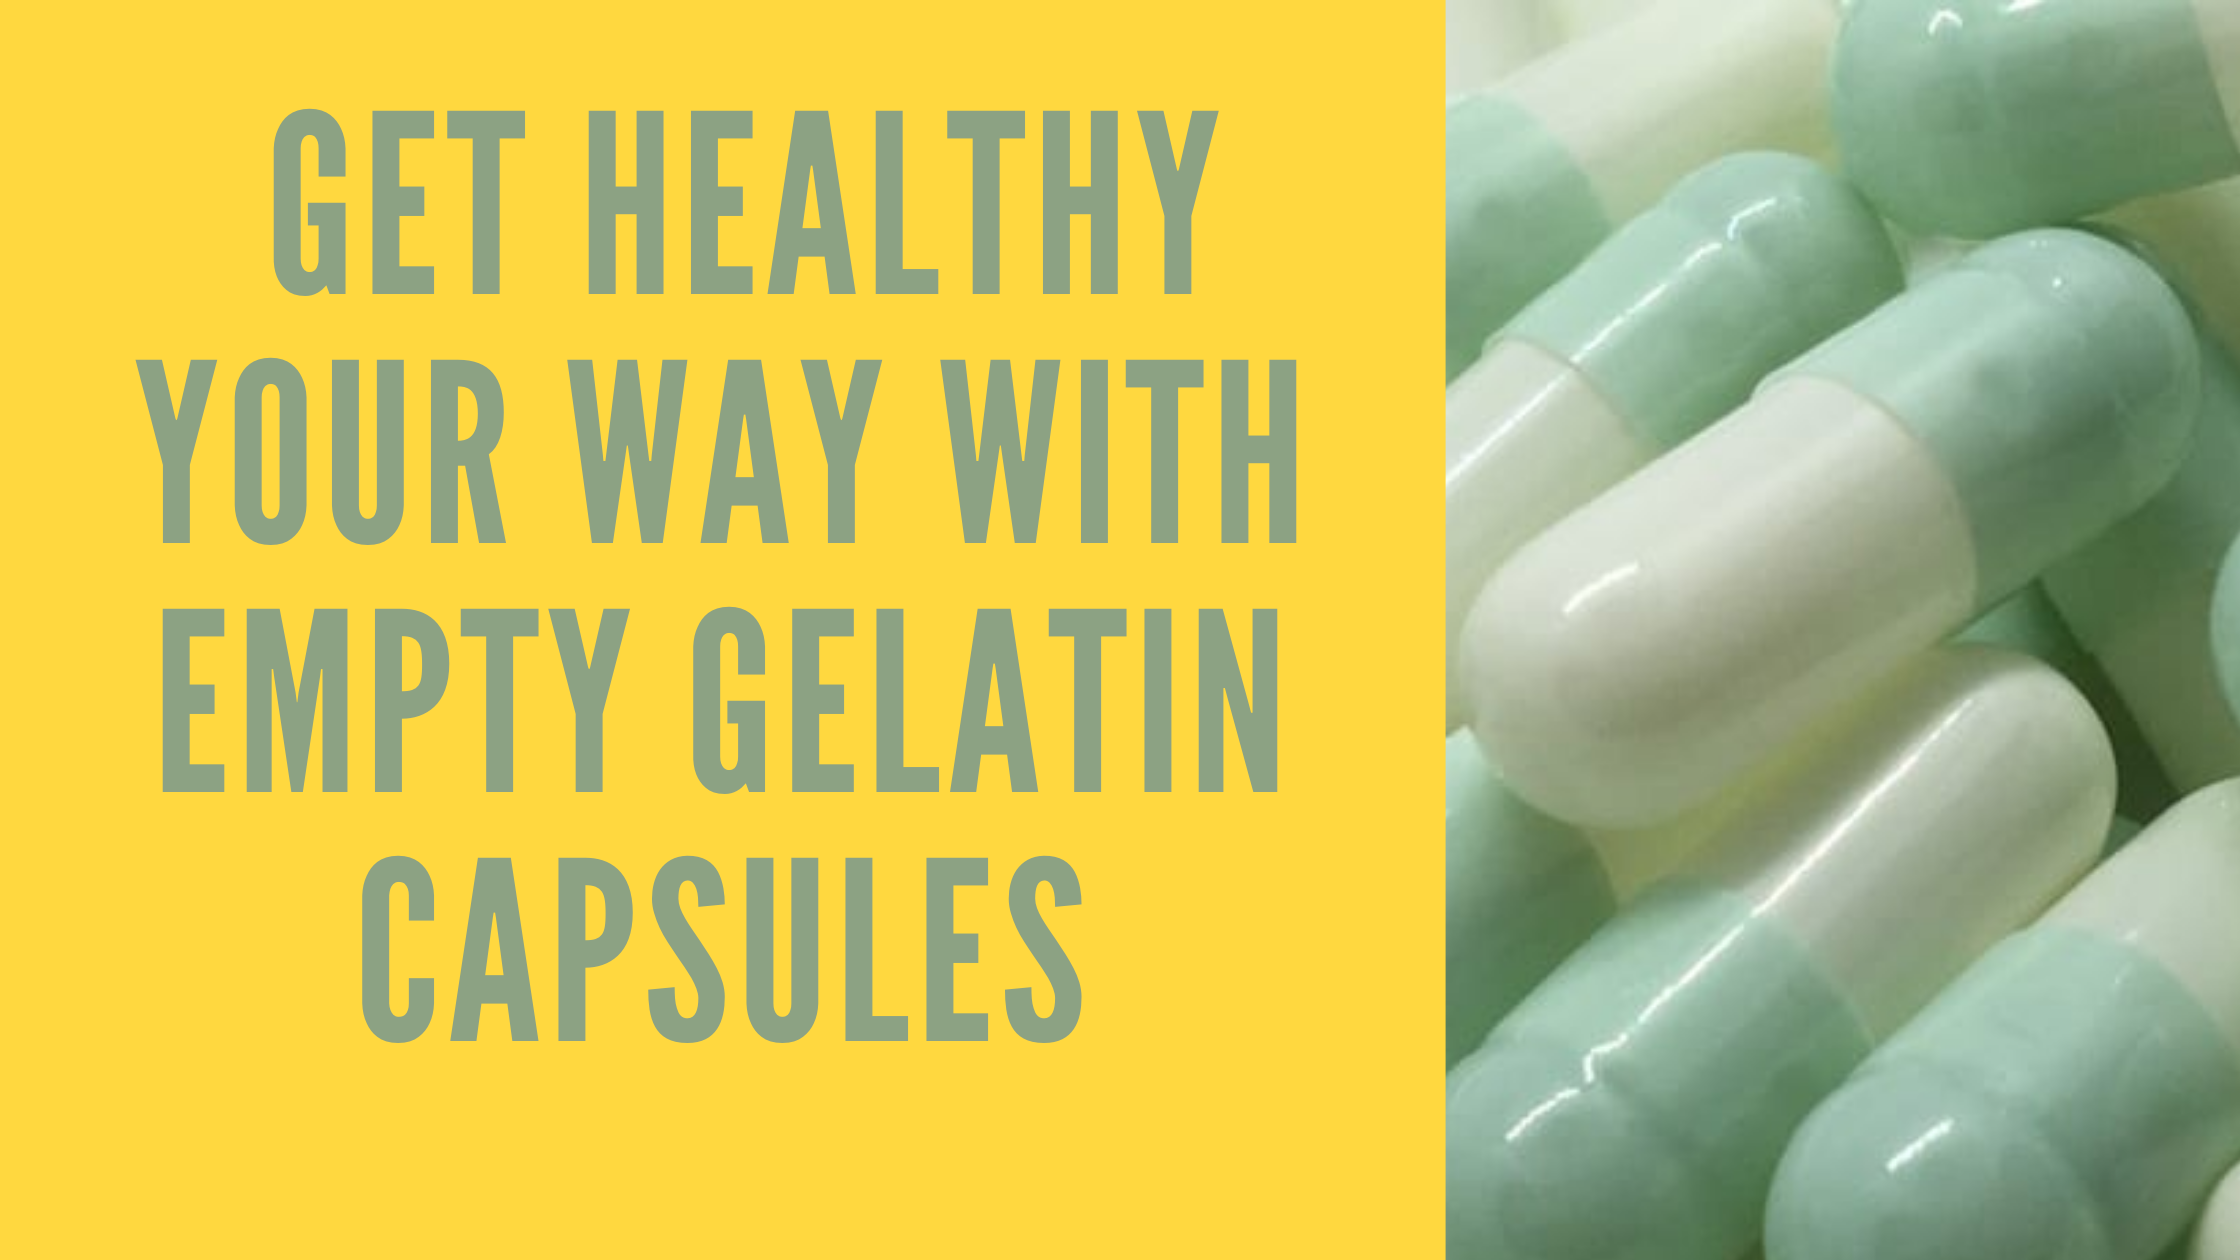 public/uploads/2021/11/Get-Healthy-Your-Way-With-Empty-Gelatin-Capsules.png